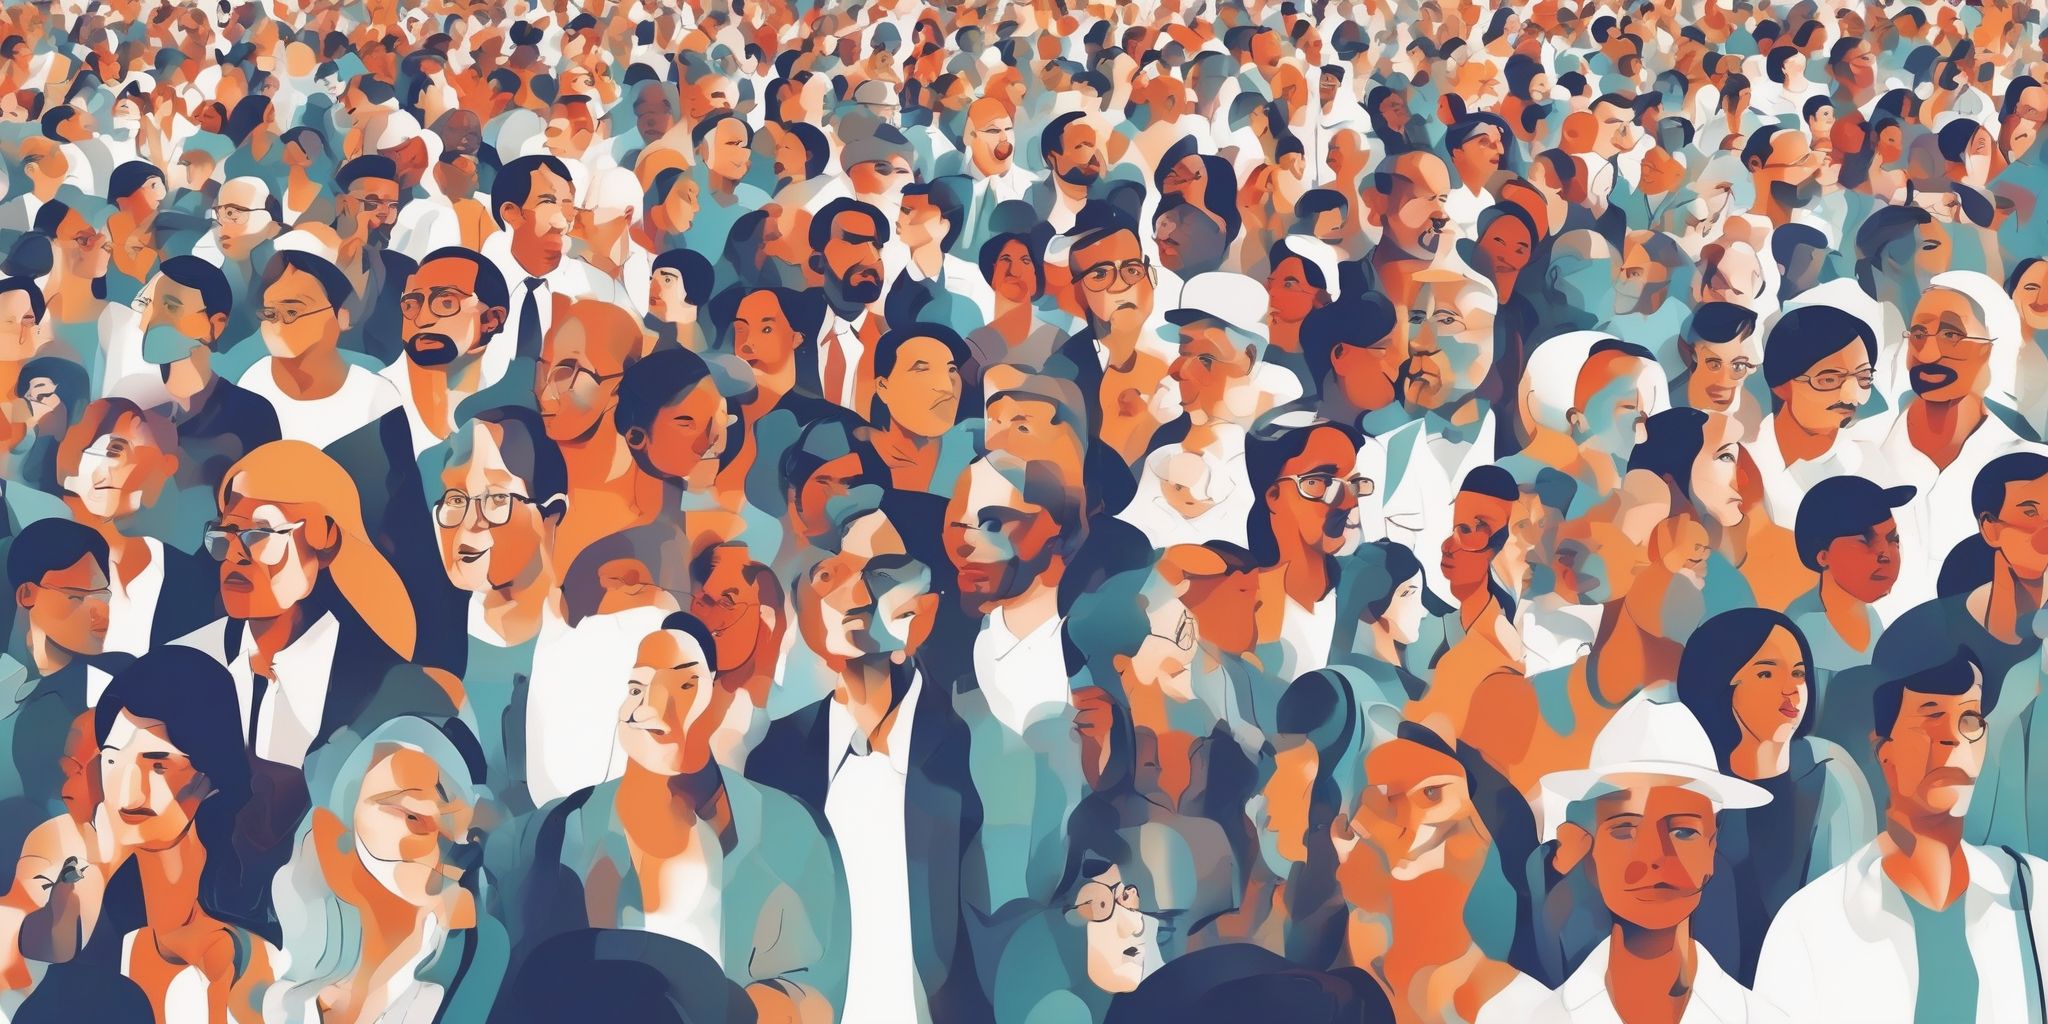 Crowd in illustration style with gradients and white background